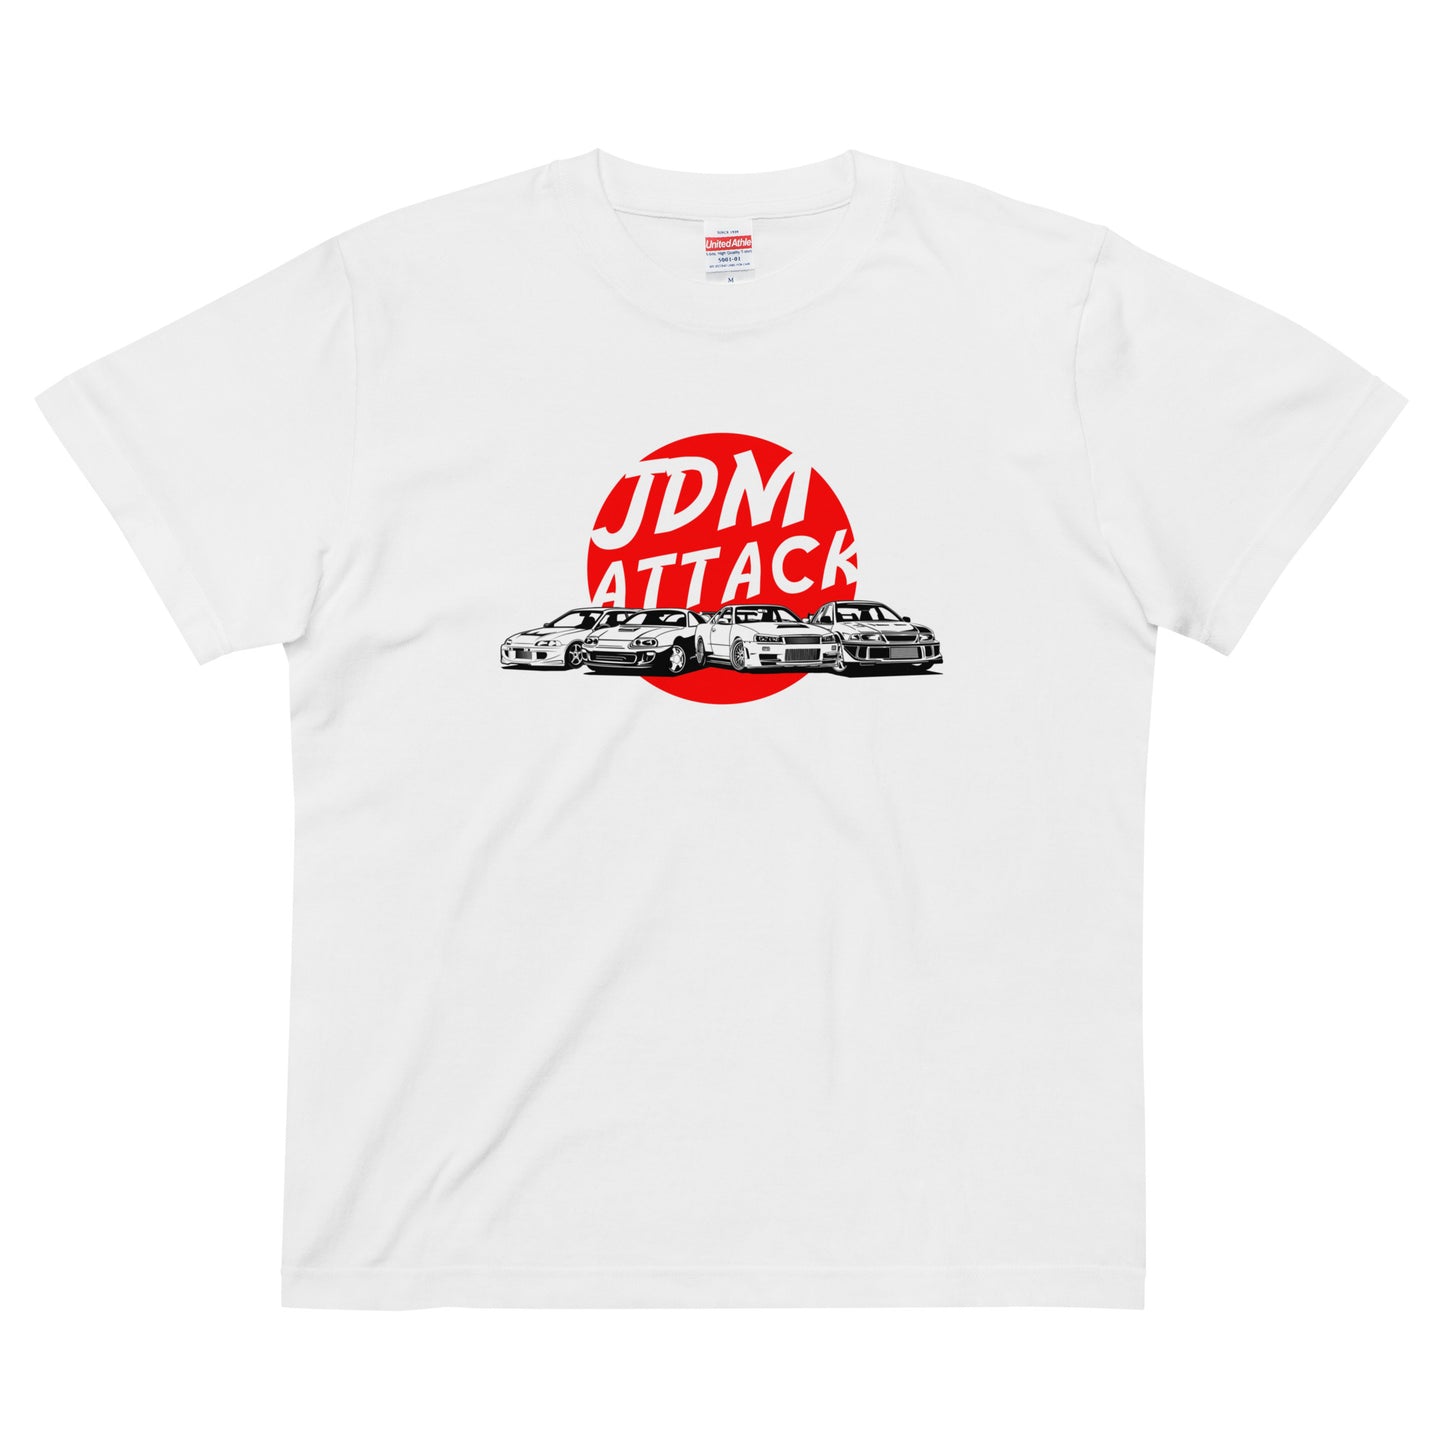 JDM Attack Tee